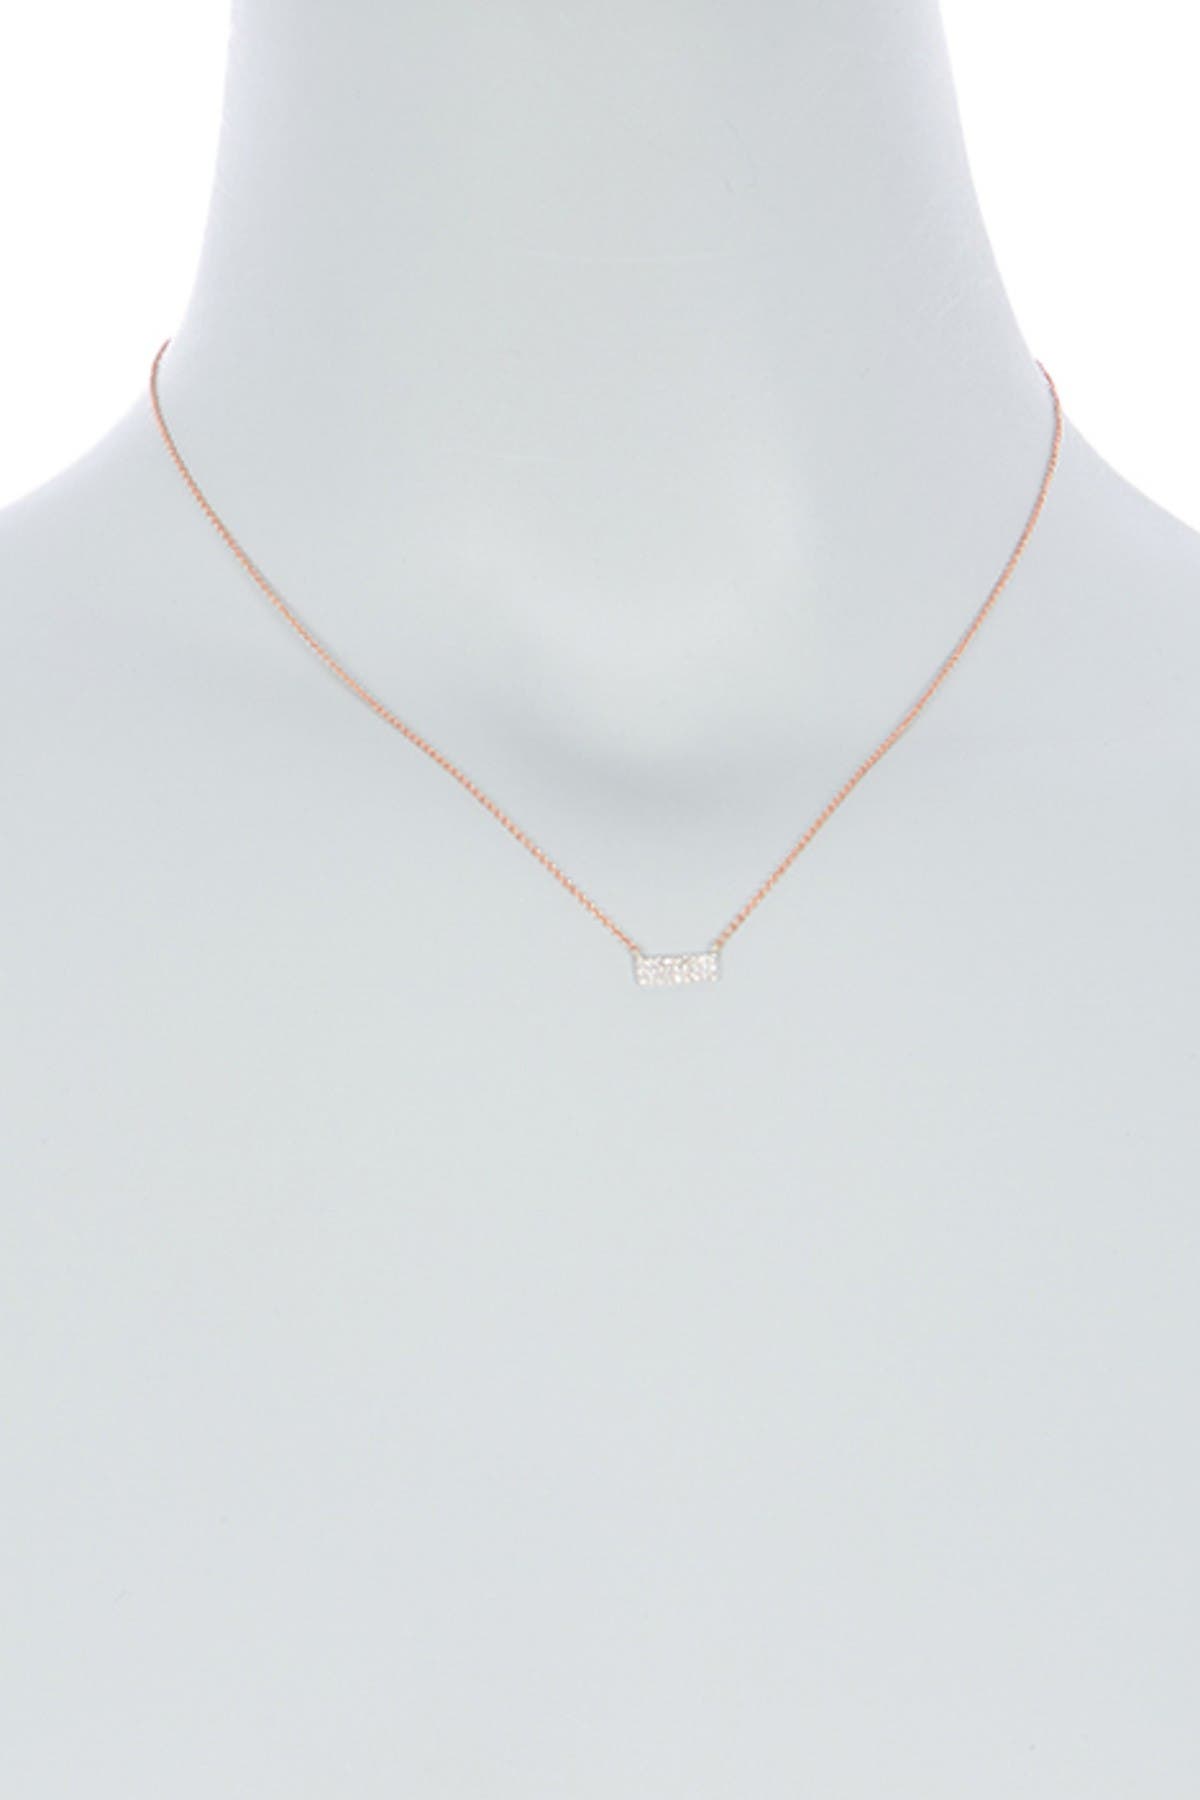 Meira T 14k Rose Gold Pave Diamond Bar Pendant Necklace In Open Red